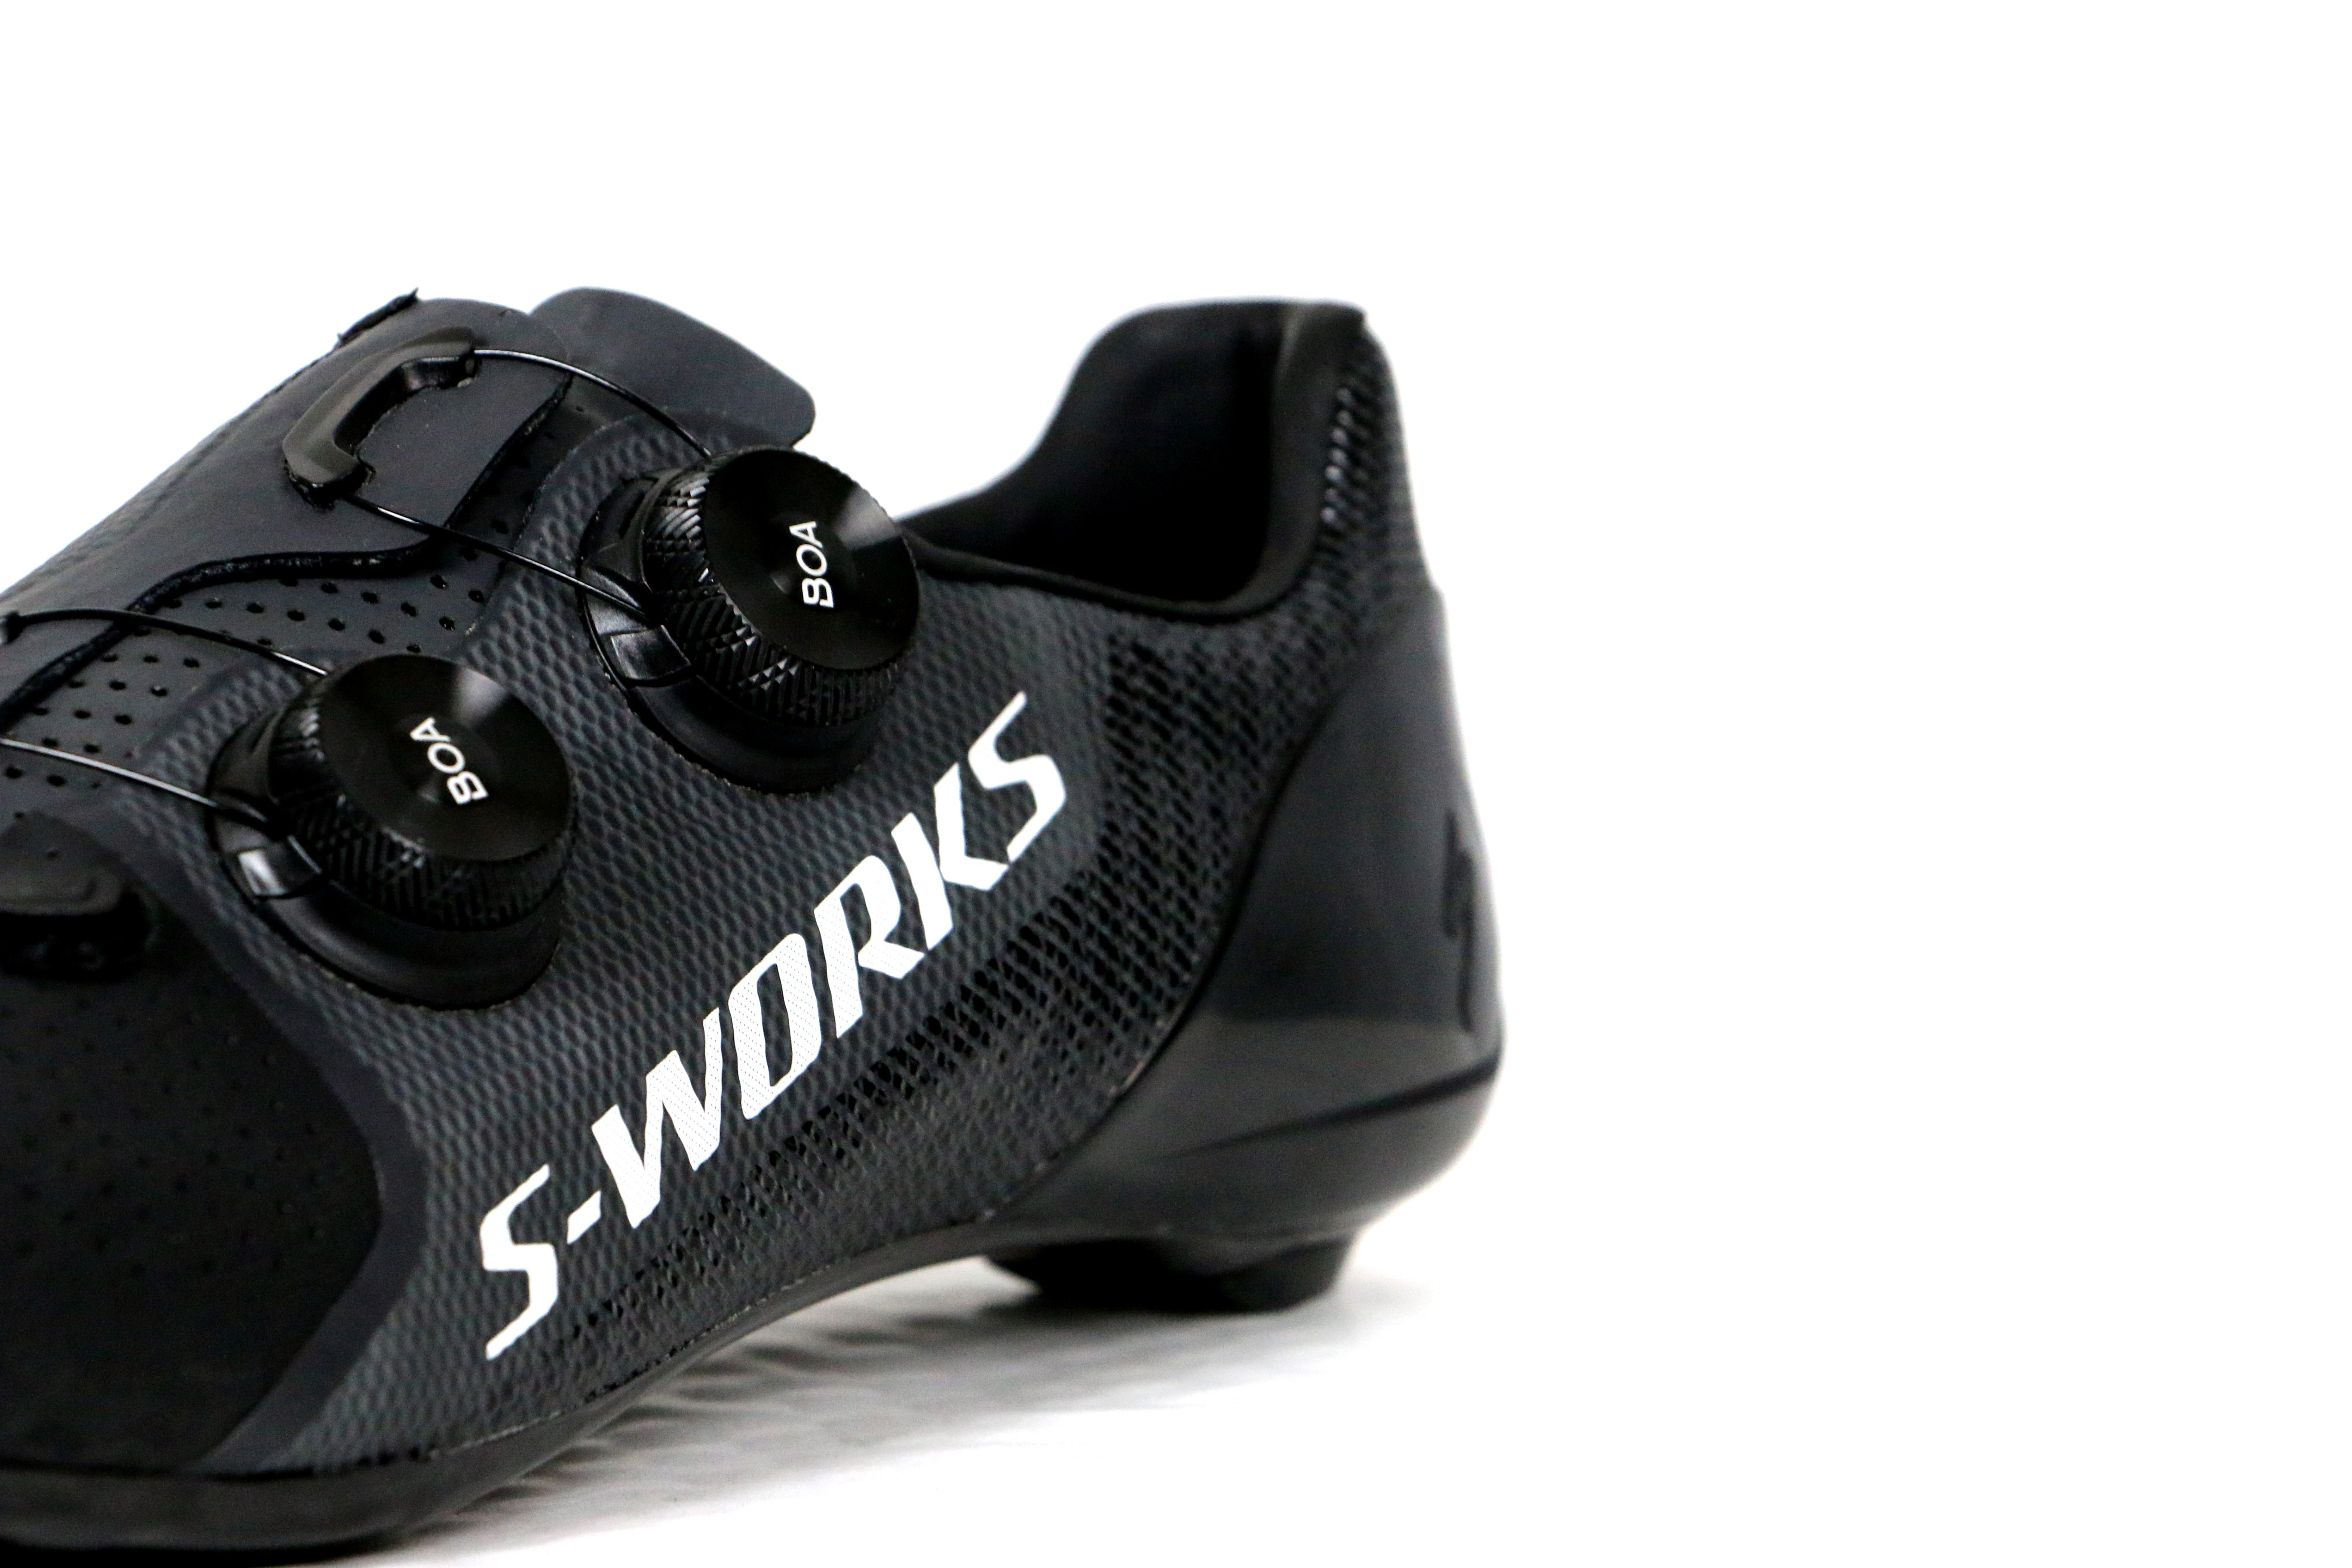 s works 7 shoes review